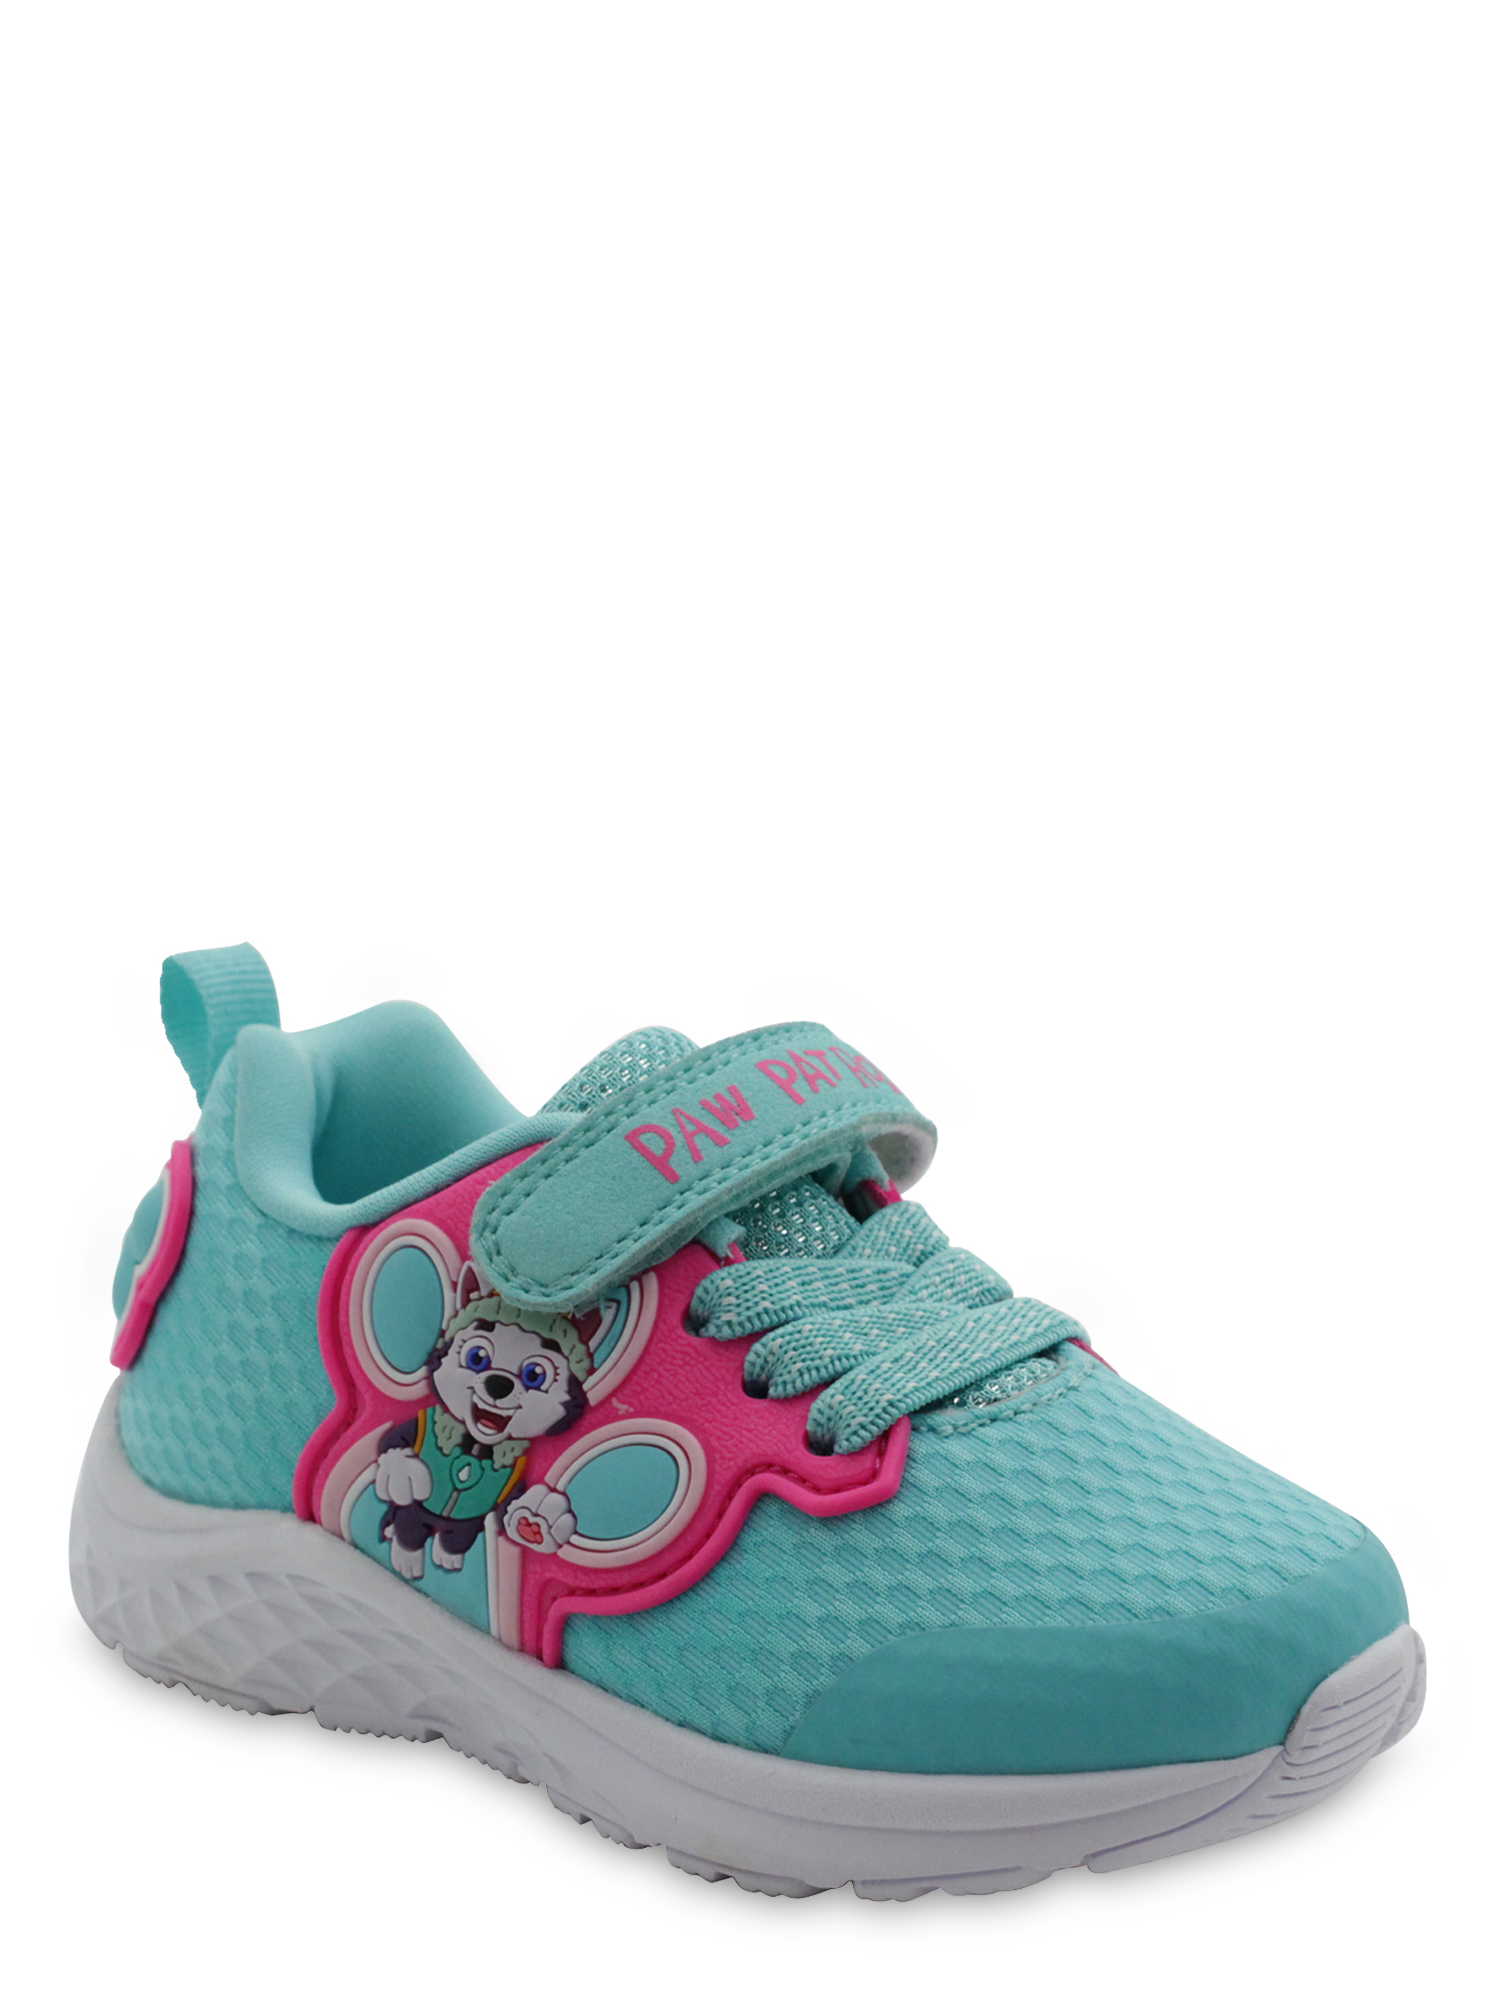 13 6, Details about  / Athletic Works Youth Girls Rainbow Runner Athletic Shoes 12 4 5 1